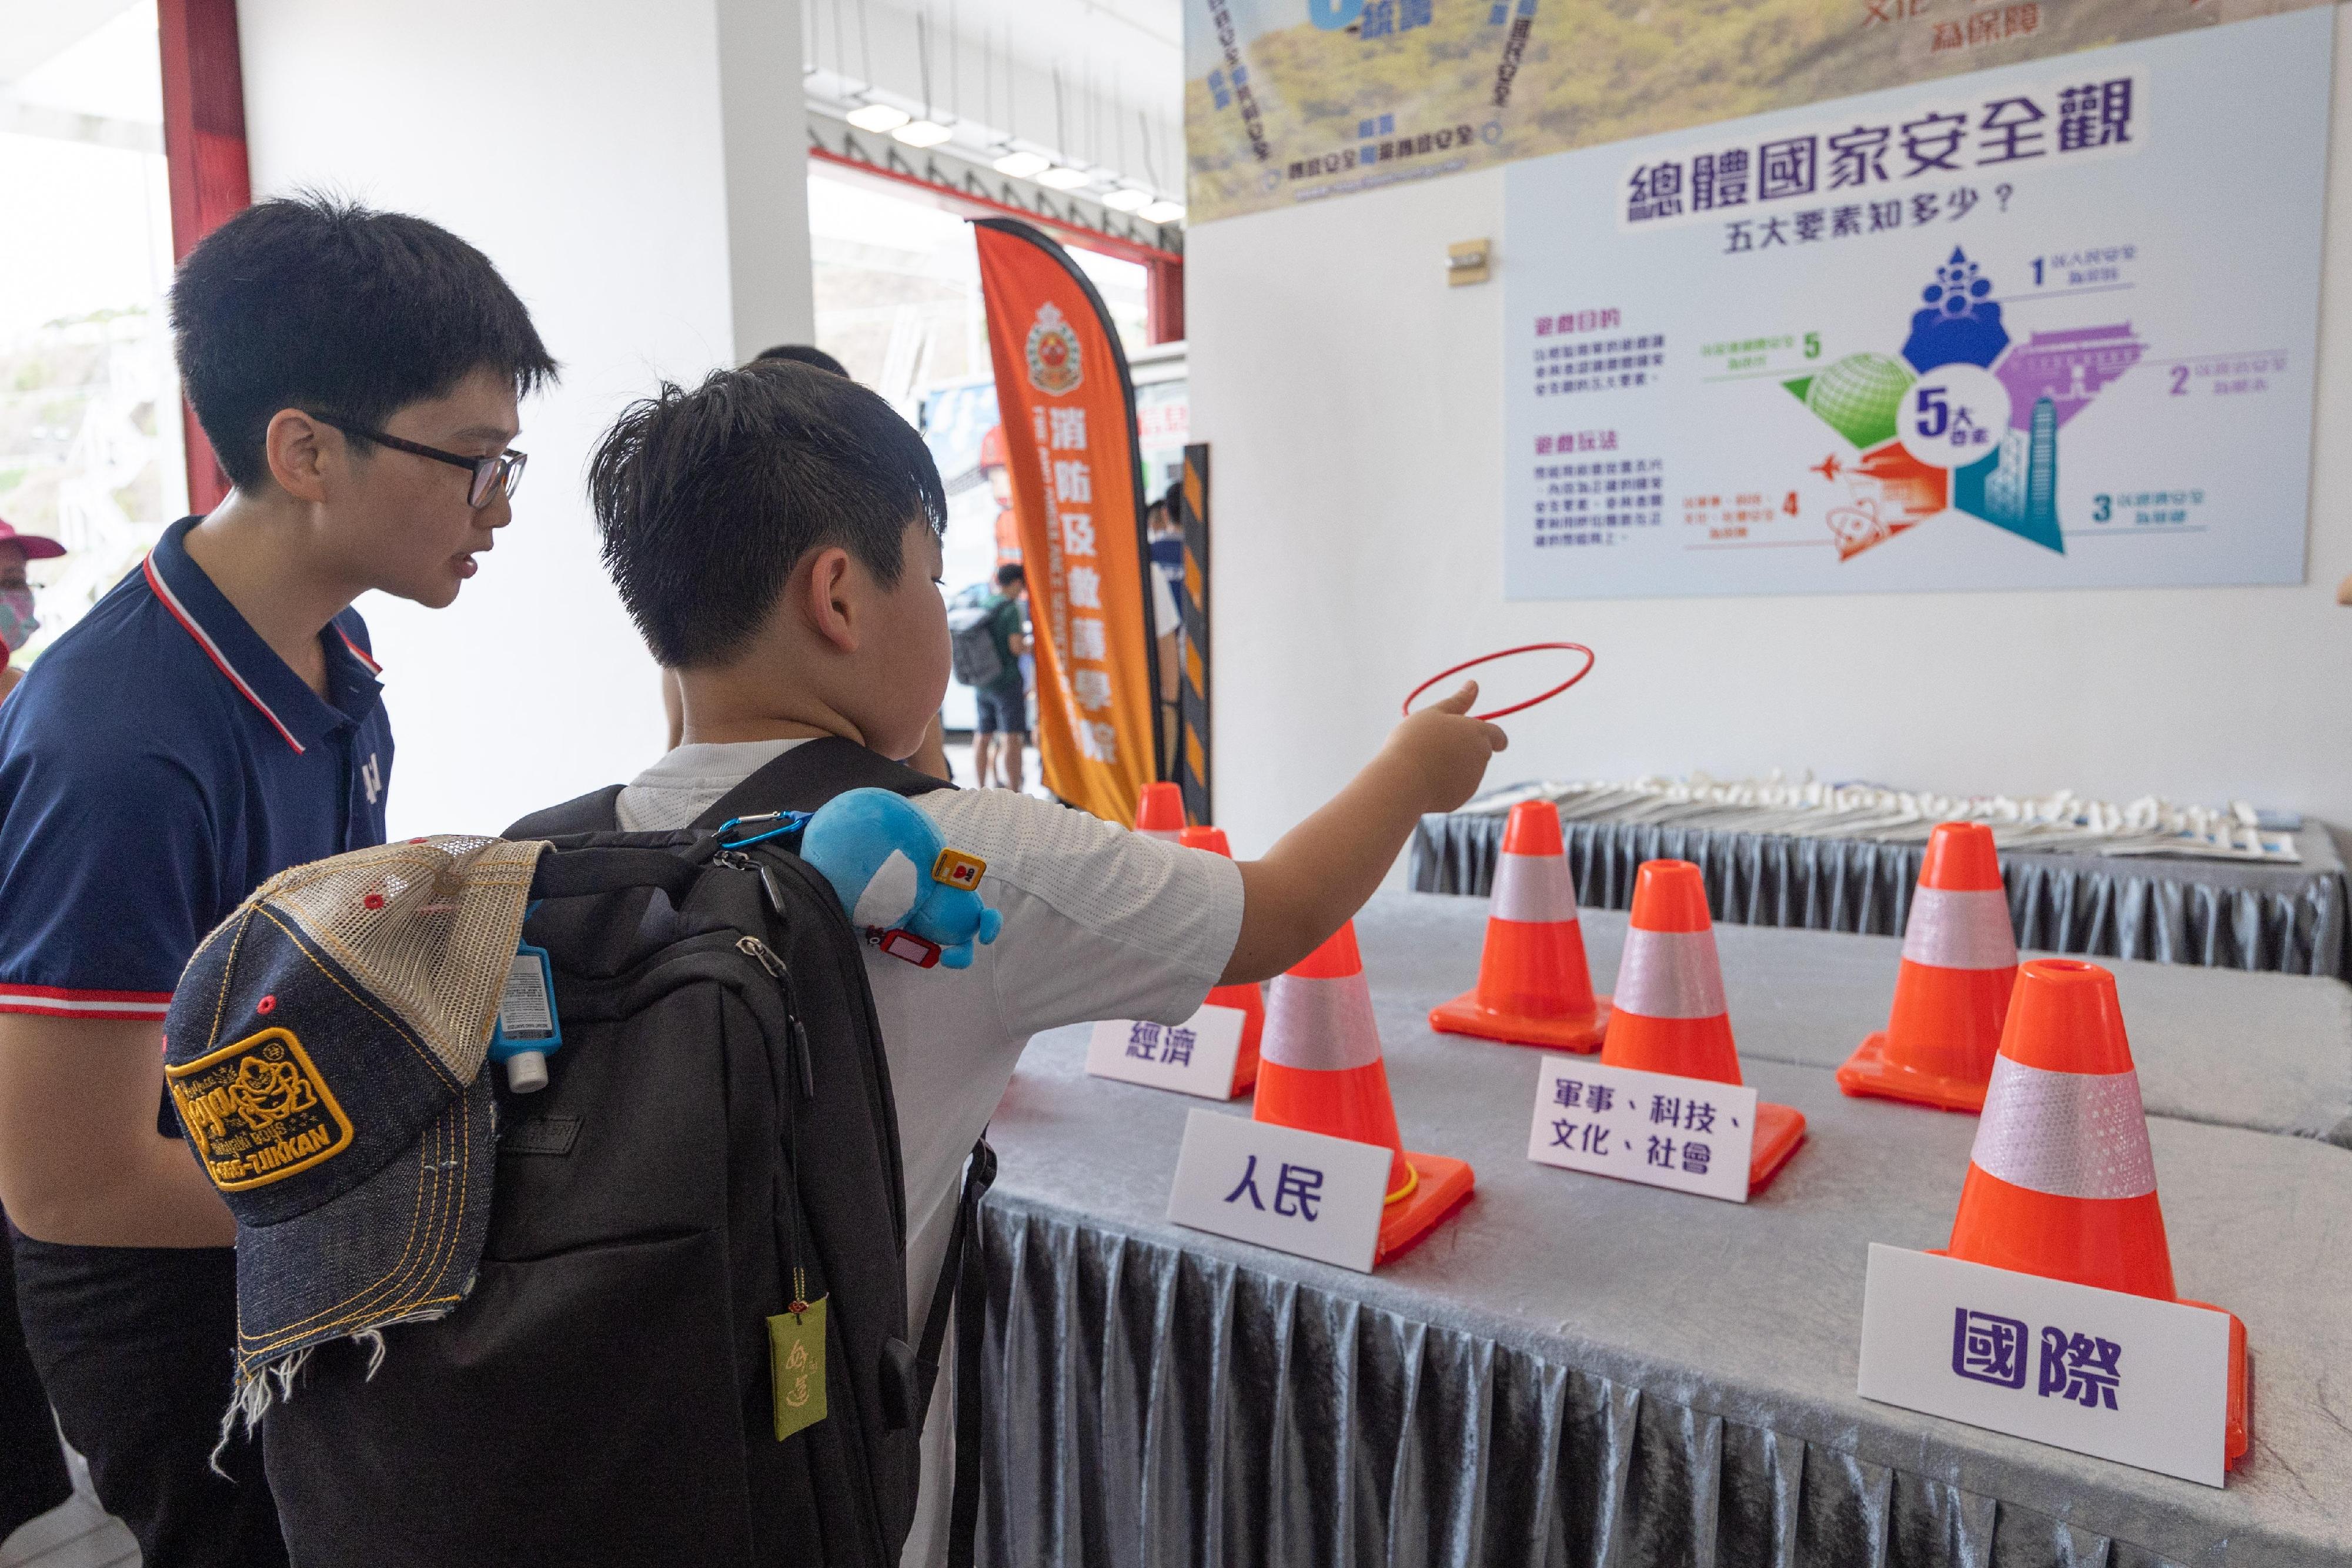 In response to and support of National Security Education Day, the Fire Services Department held an open day at the Fire and Ambulance Services Academy in Tseung Kwan O today (April 14). Photo shows a game booth on national security which enhances public understanding of the importance of national security through interactive engagement.